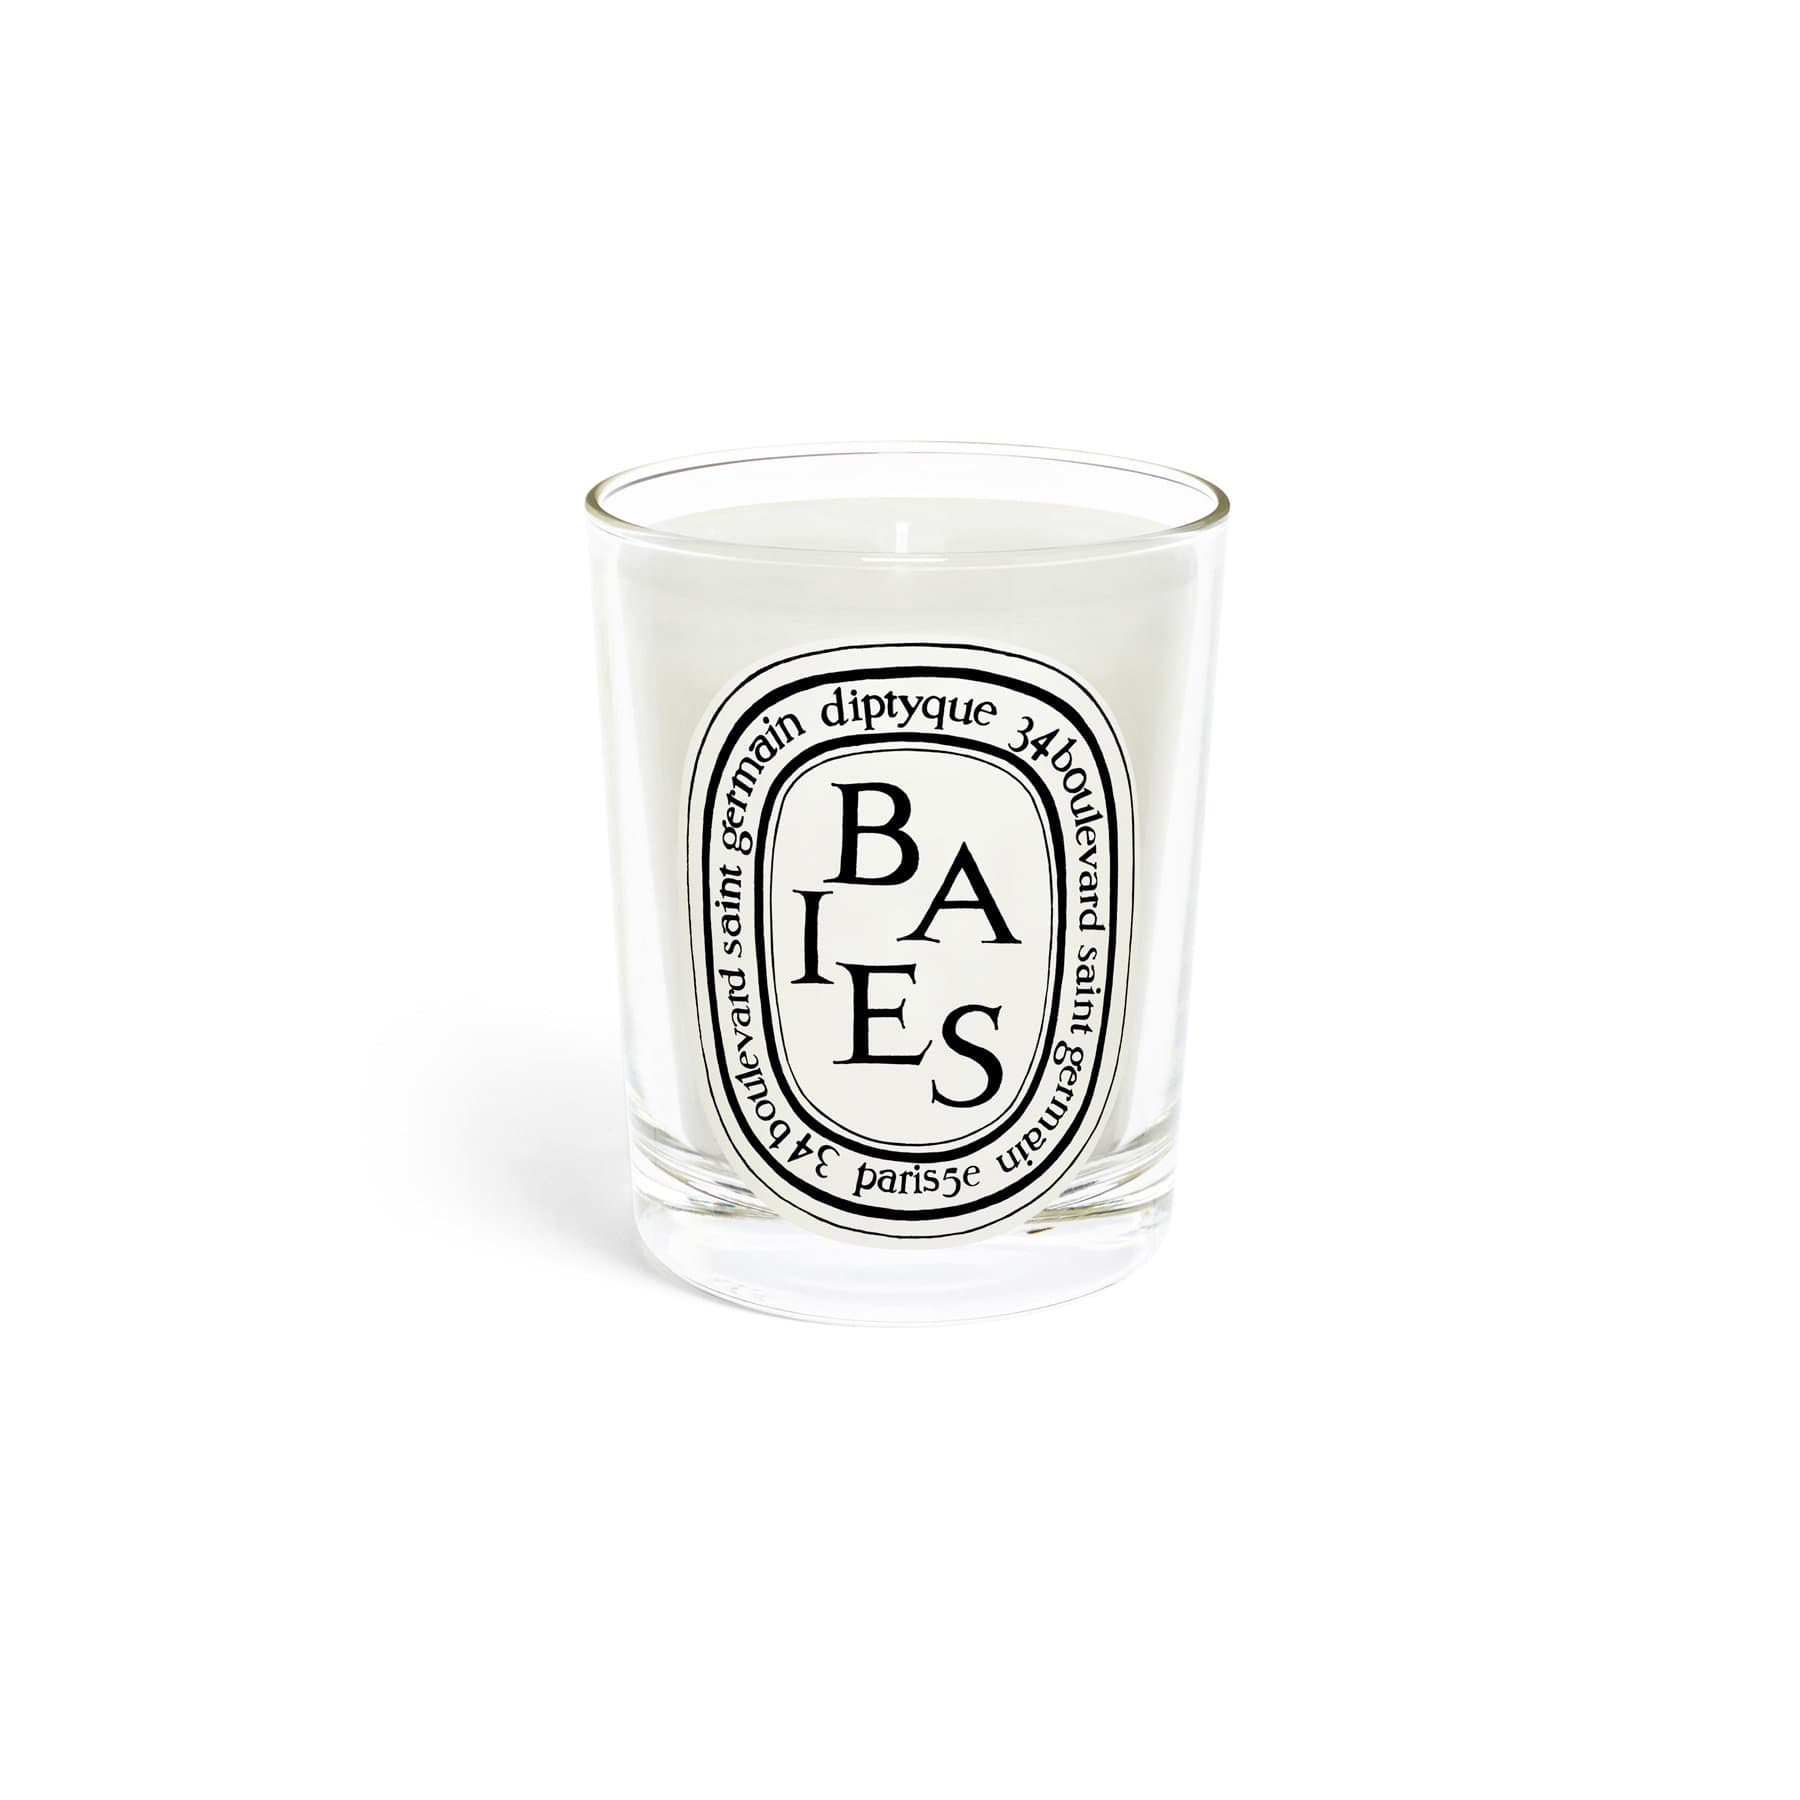 Baies Diptyque Scented candle